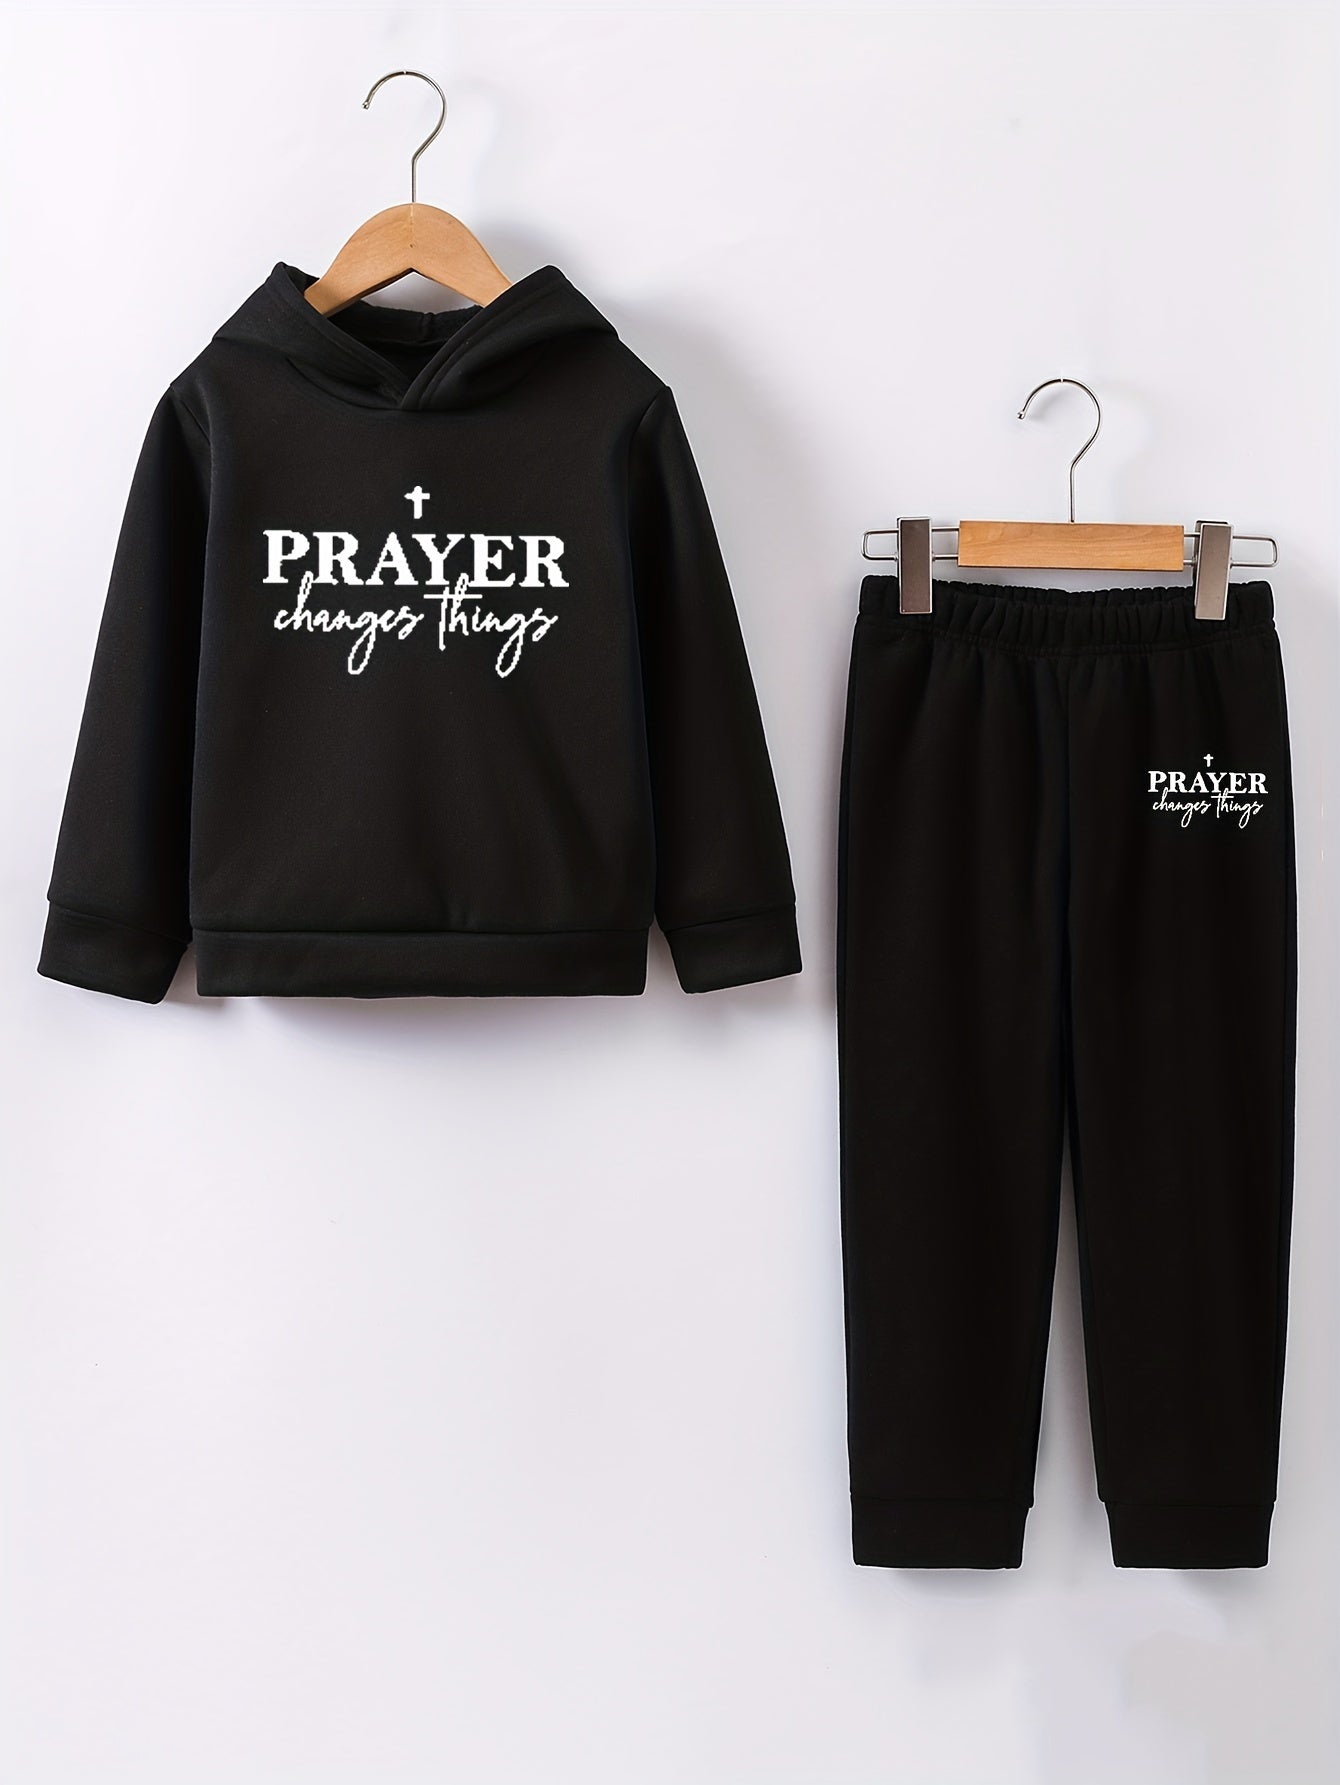 Prayer Changes Things Youth Christian Casual Outfit claimedbygoddesigns